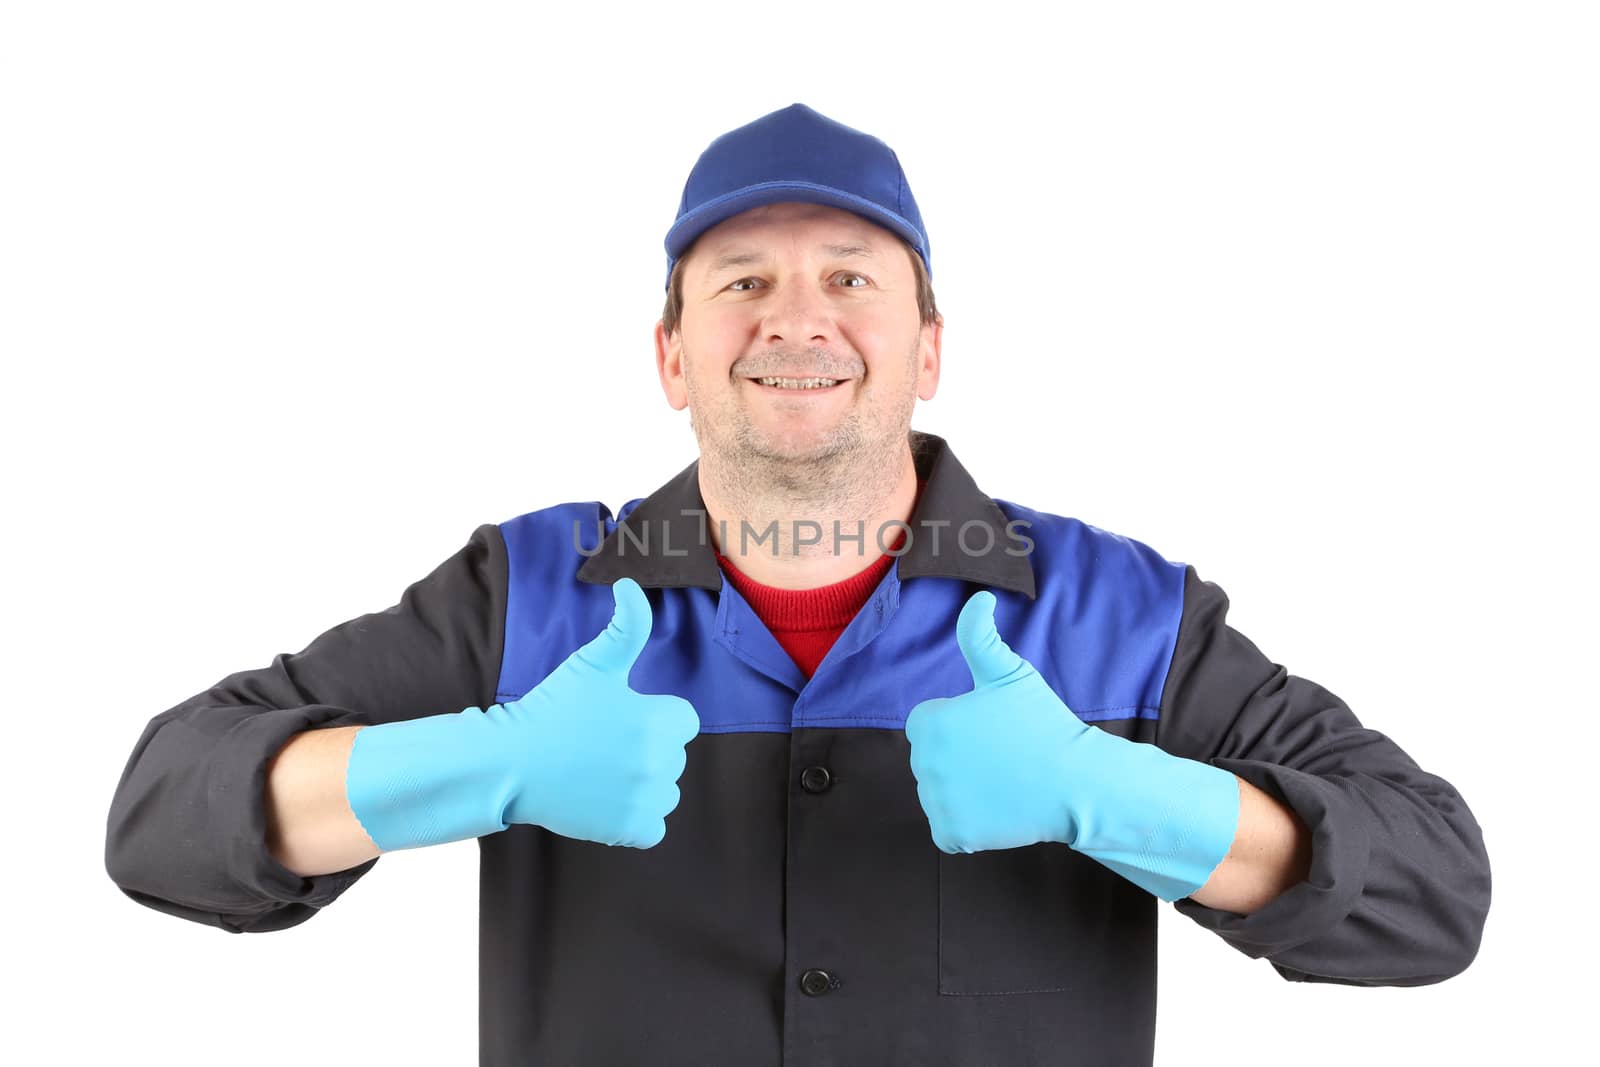 Pleased and happy worker with thumbs up. Isolated on a white background.